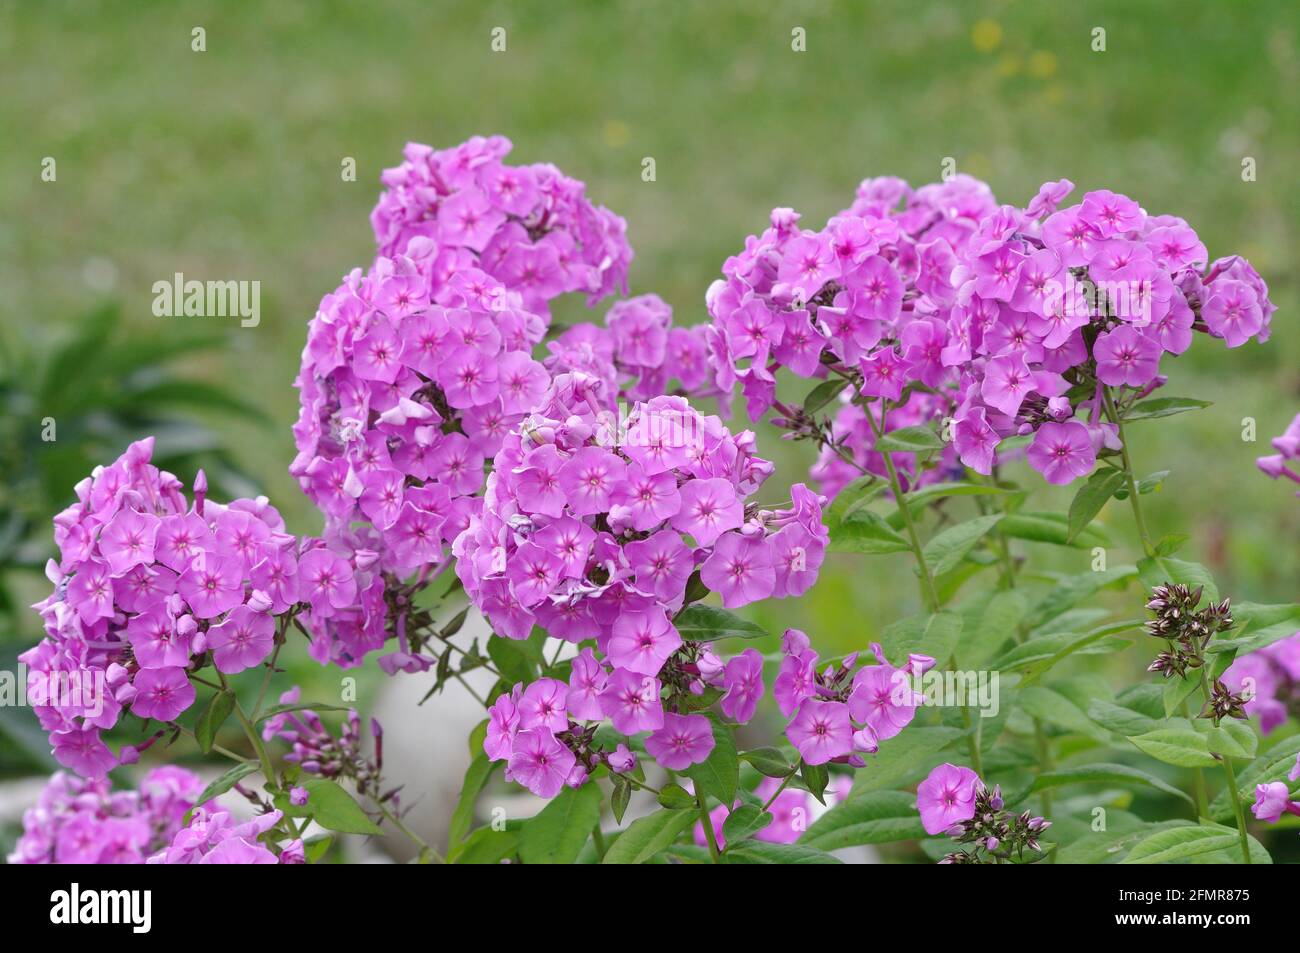 Pink flowers of Phlox paniculata in bloom. Beautiful garden plant. Stock Photo